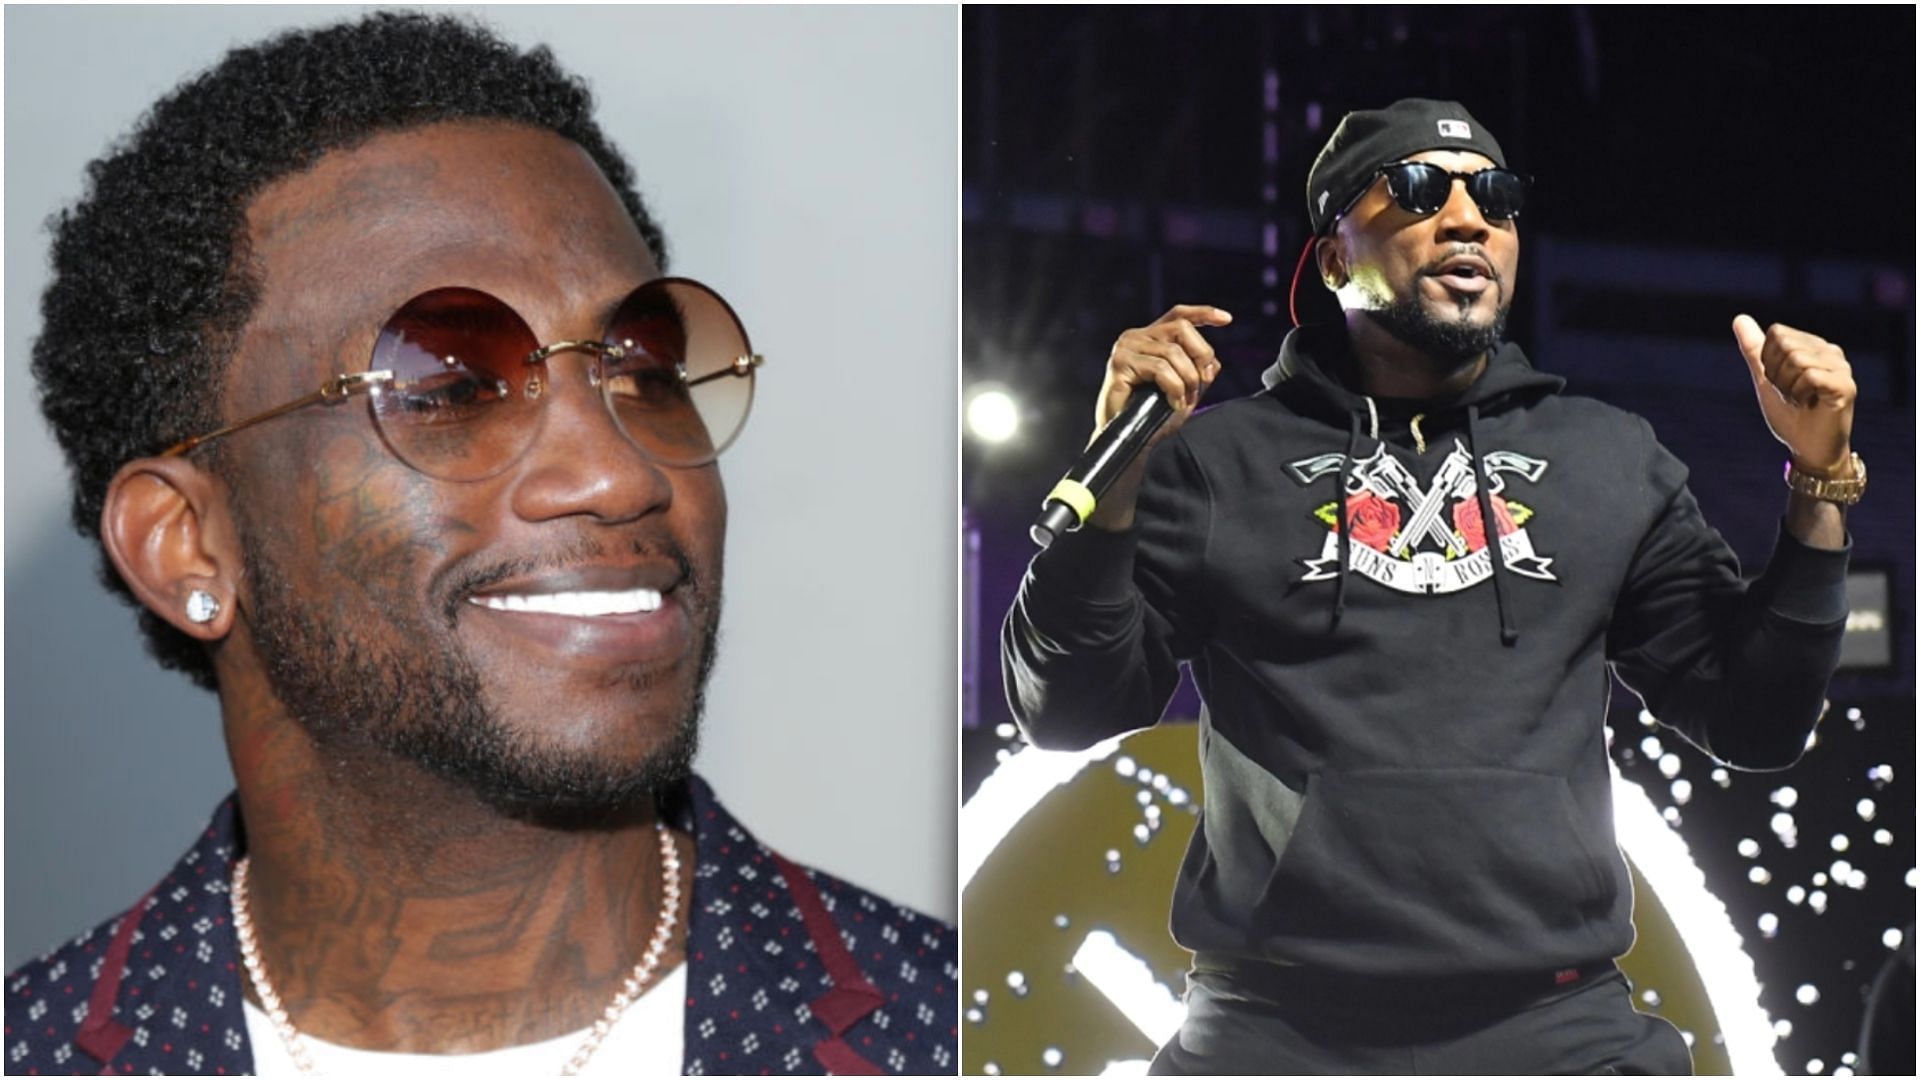 Jeezy, 2 Chainz, Gucci Mane, and more to perform at State Farm